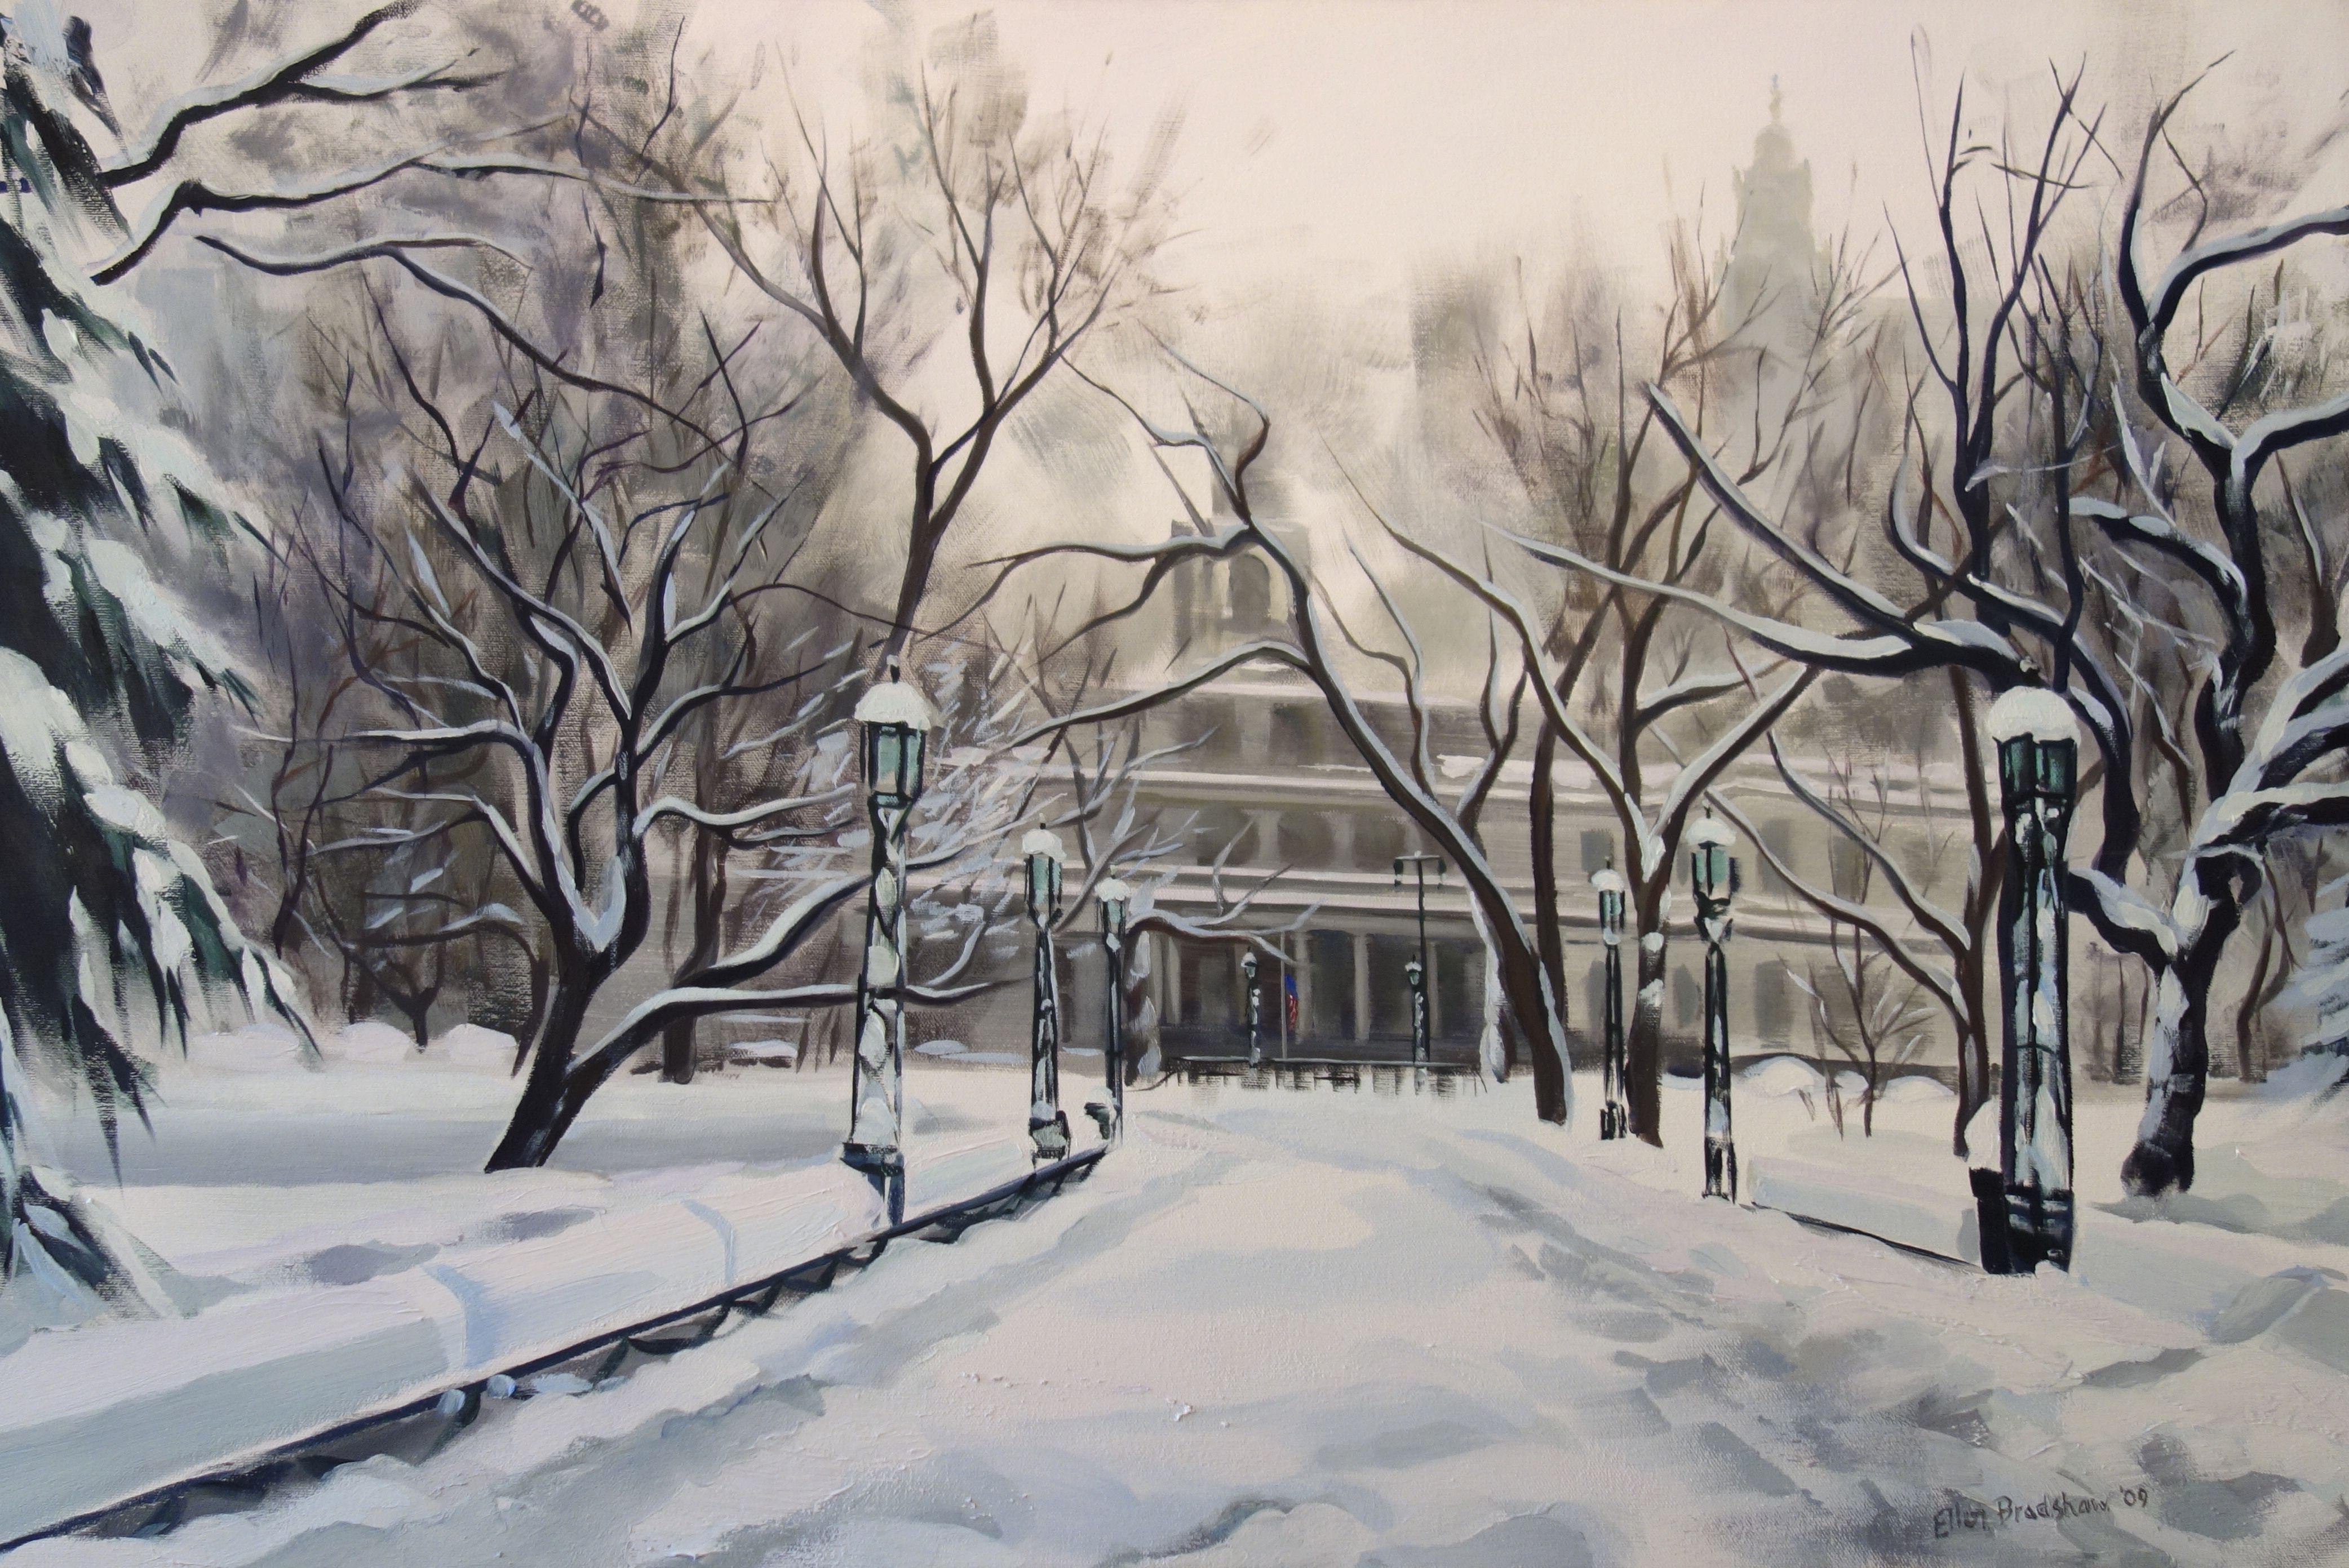 Snowed In, City Hall, Painting, Oil on Canvas